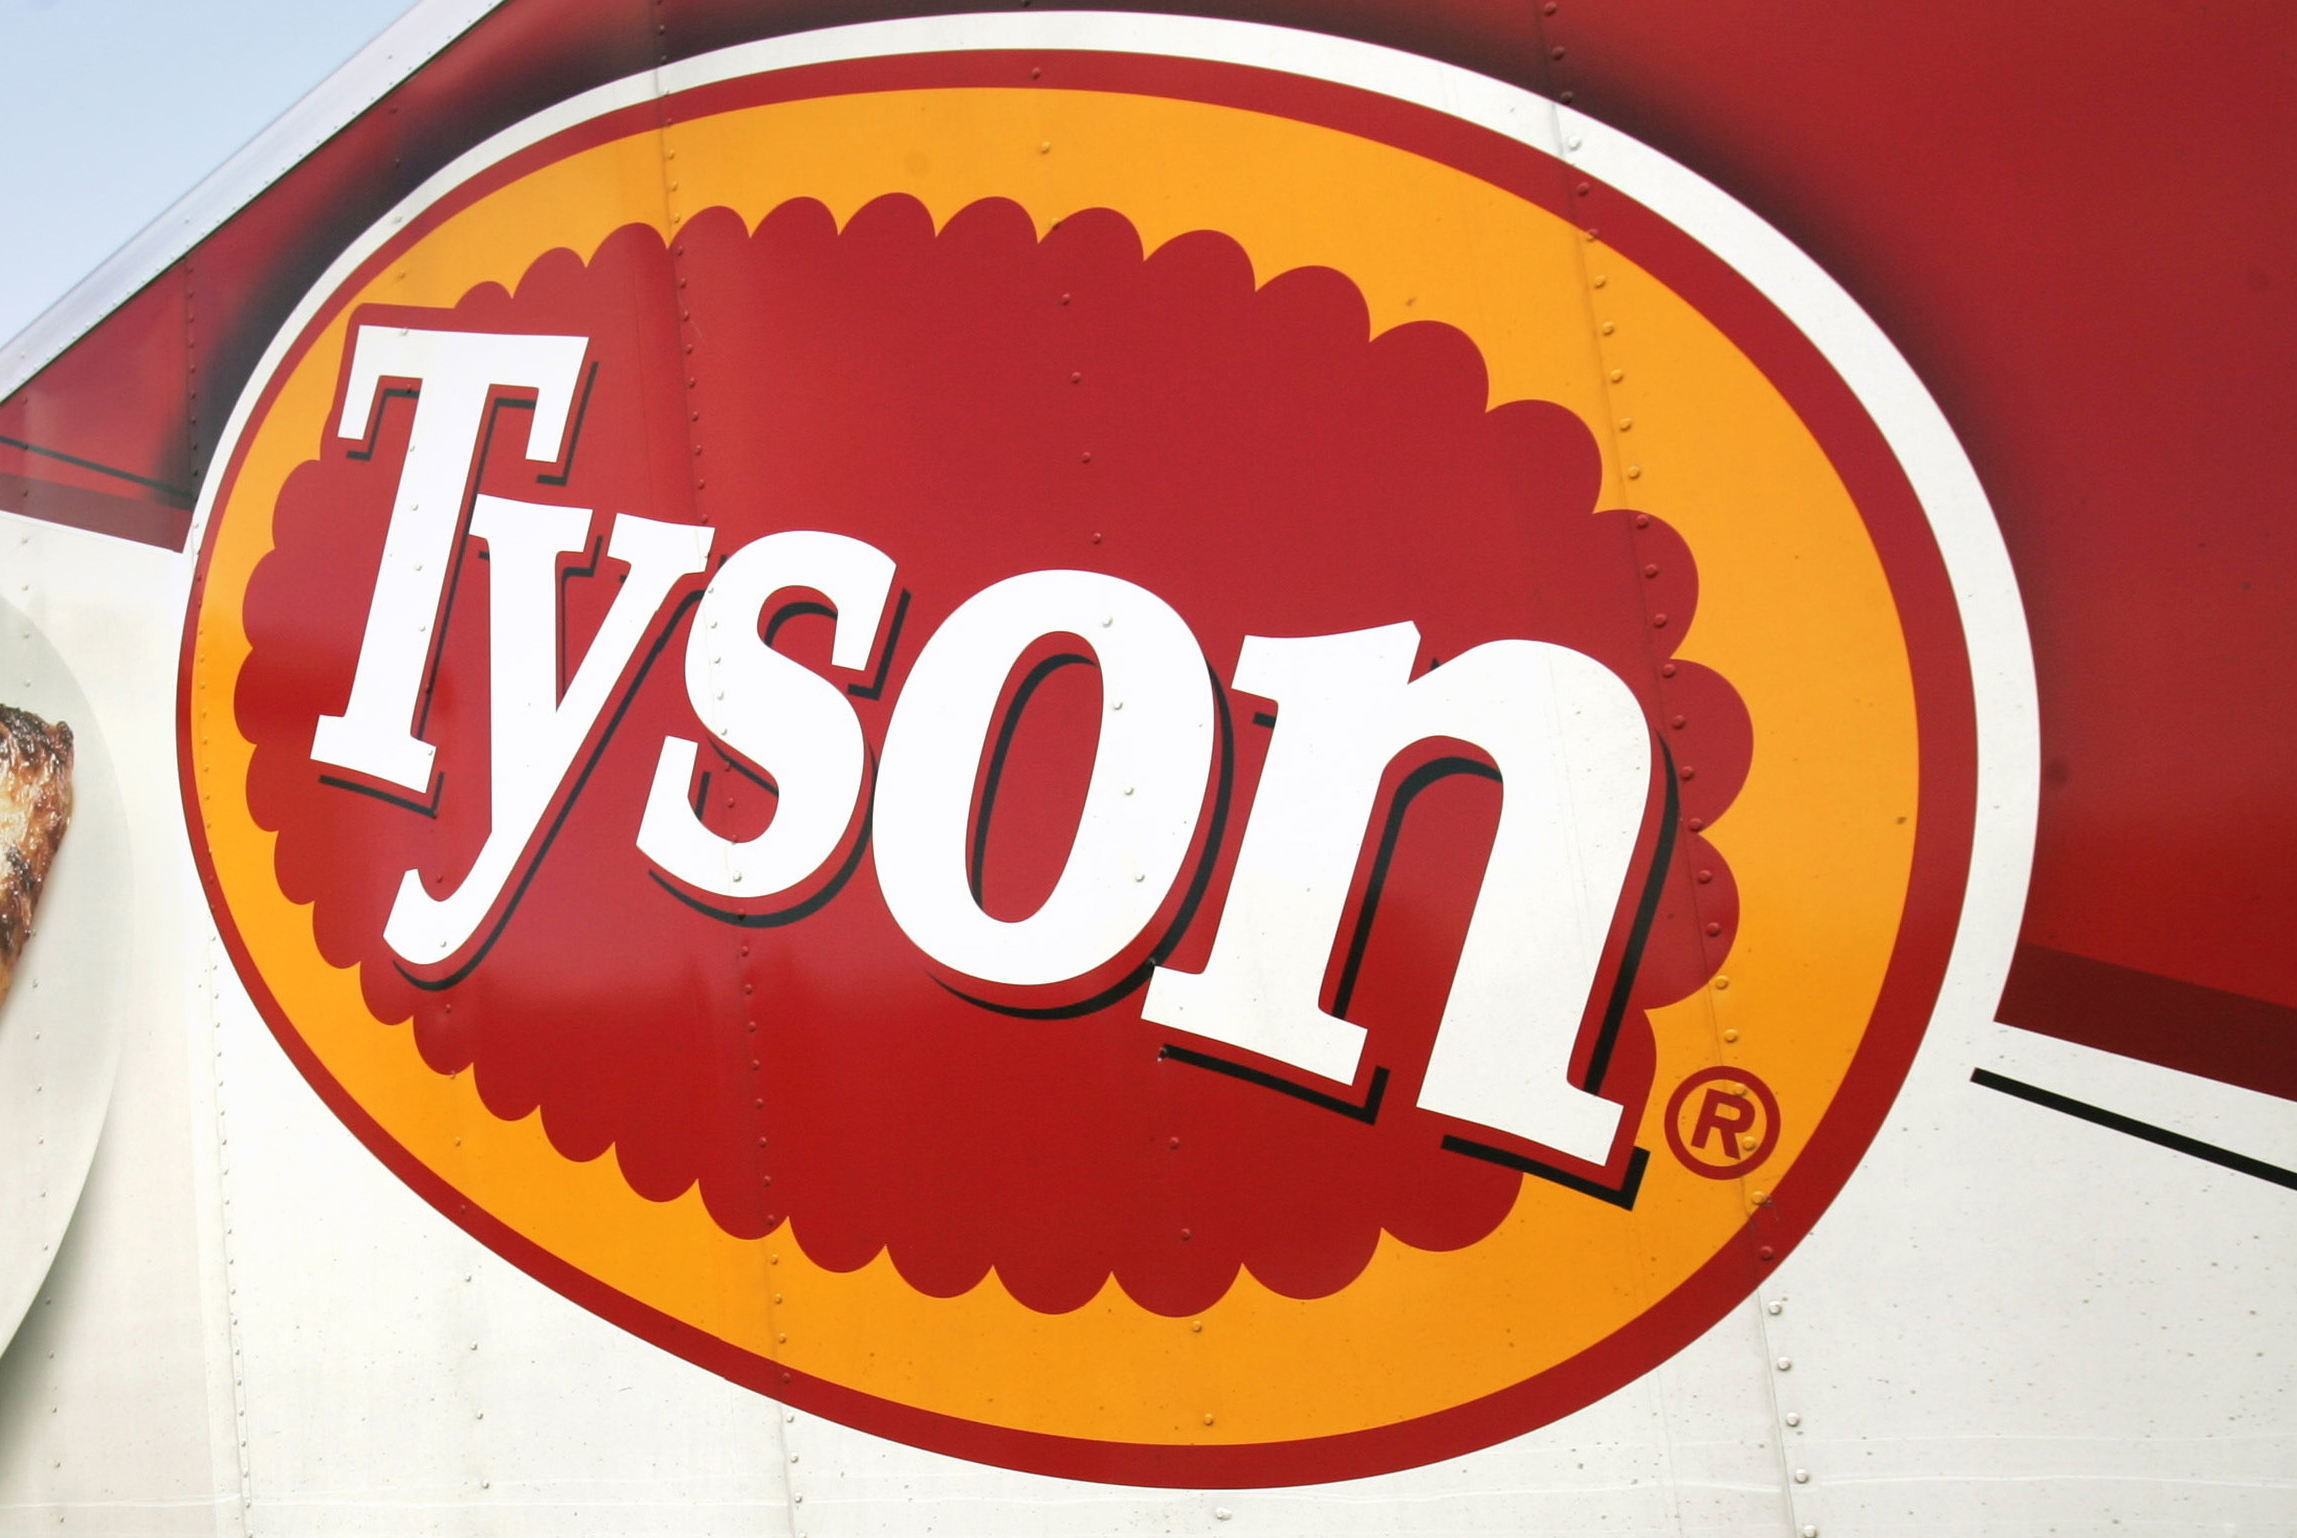 PHOTO: In this Oct. 28, 2009, file photo, a Tyson Foods, Inc., truck is parked at a food warehouse in Little Rock, Ark.